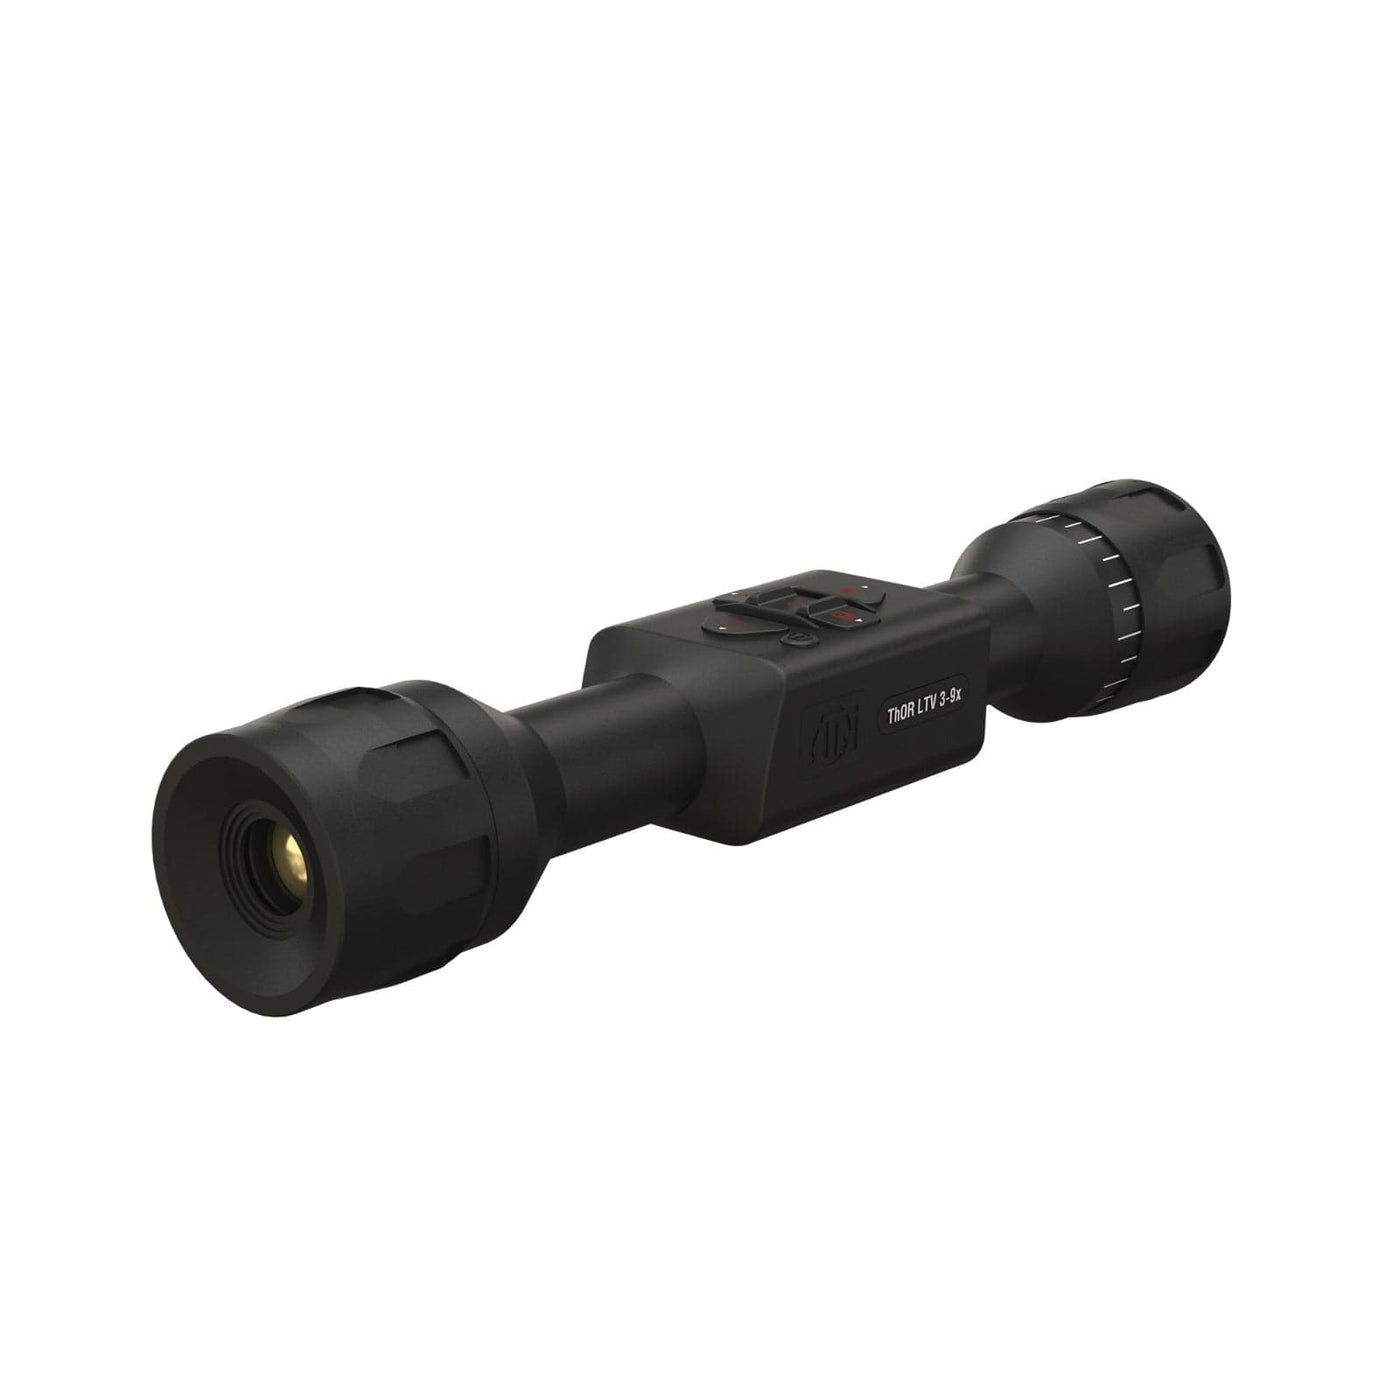 ATN ATN Thor LTV 3-9x 160x120 12 mic Thermal Rifle Scope w Video Nightvision And Thermal